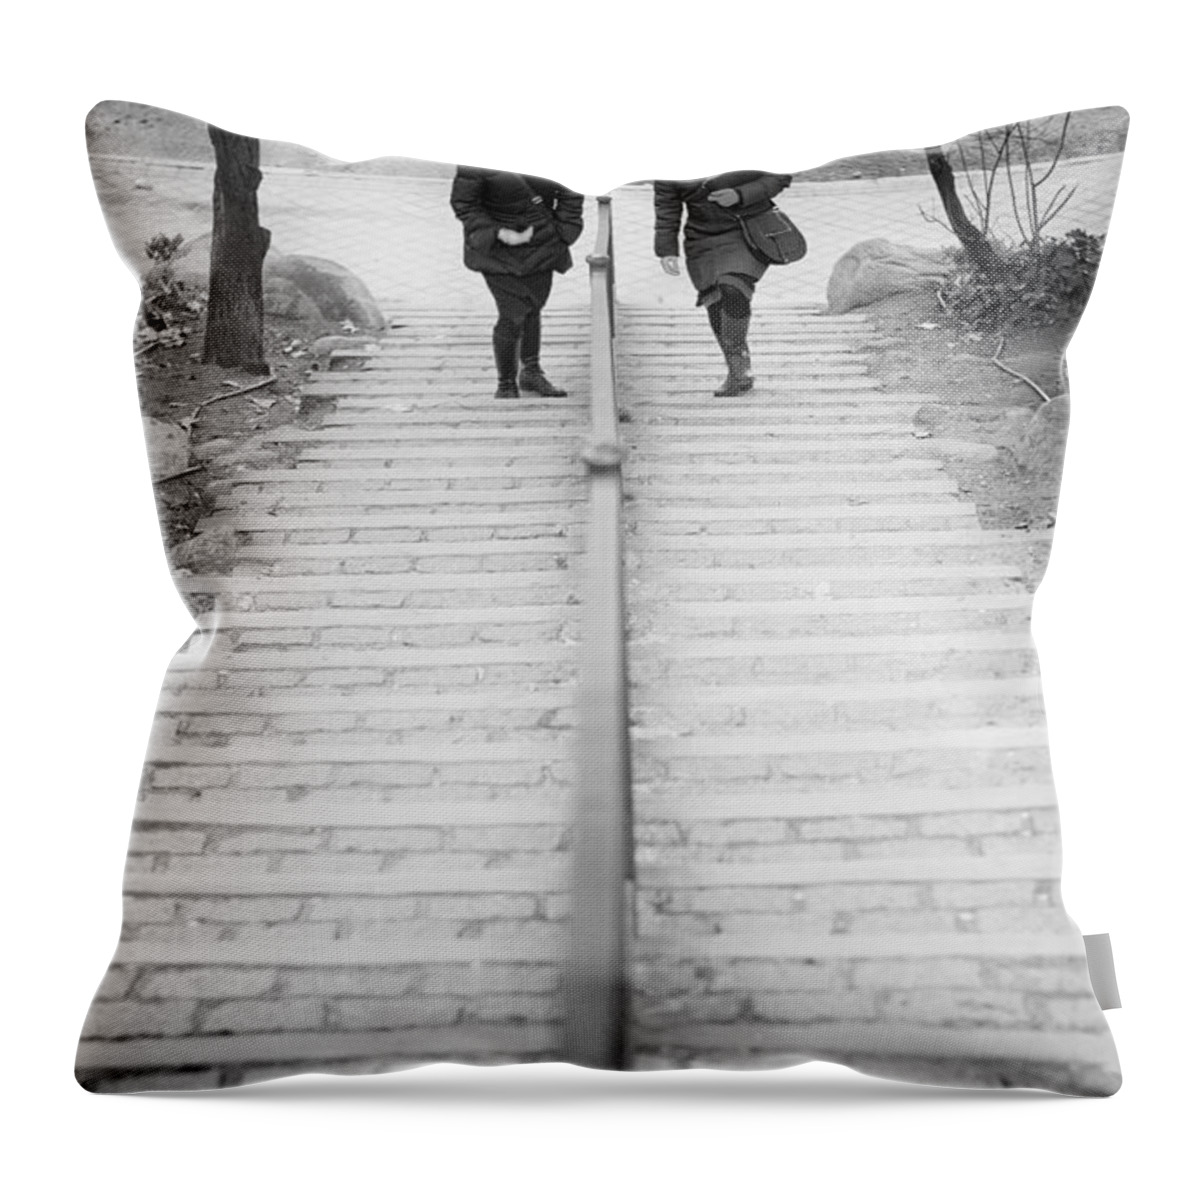 Friends Throw Pillow featuring the photograph Friends by Pablo Lopez